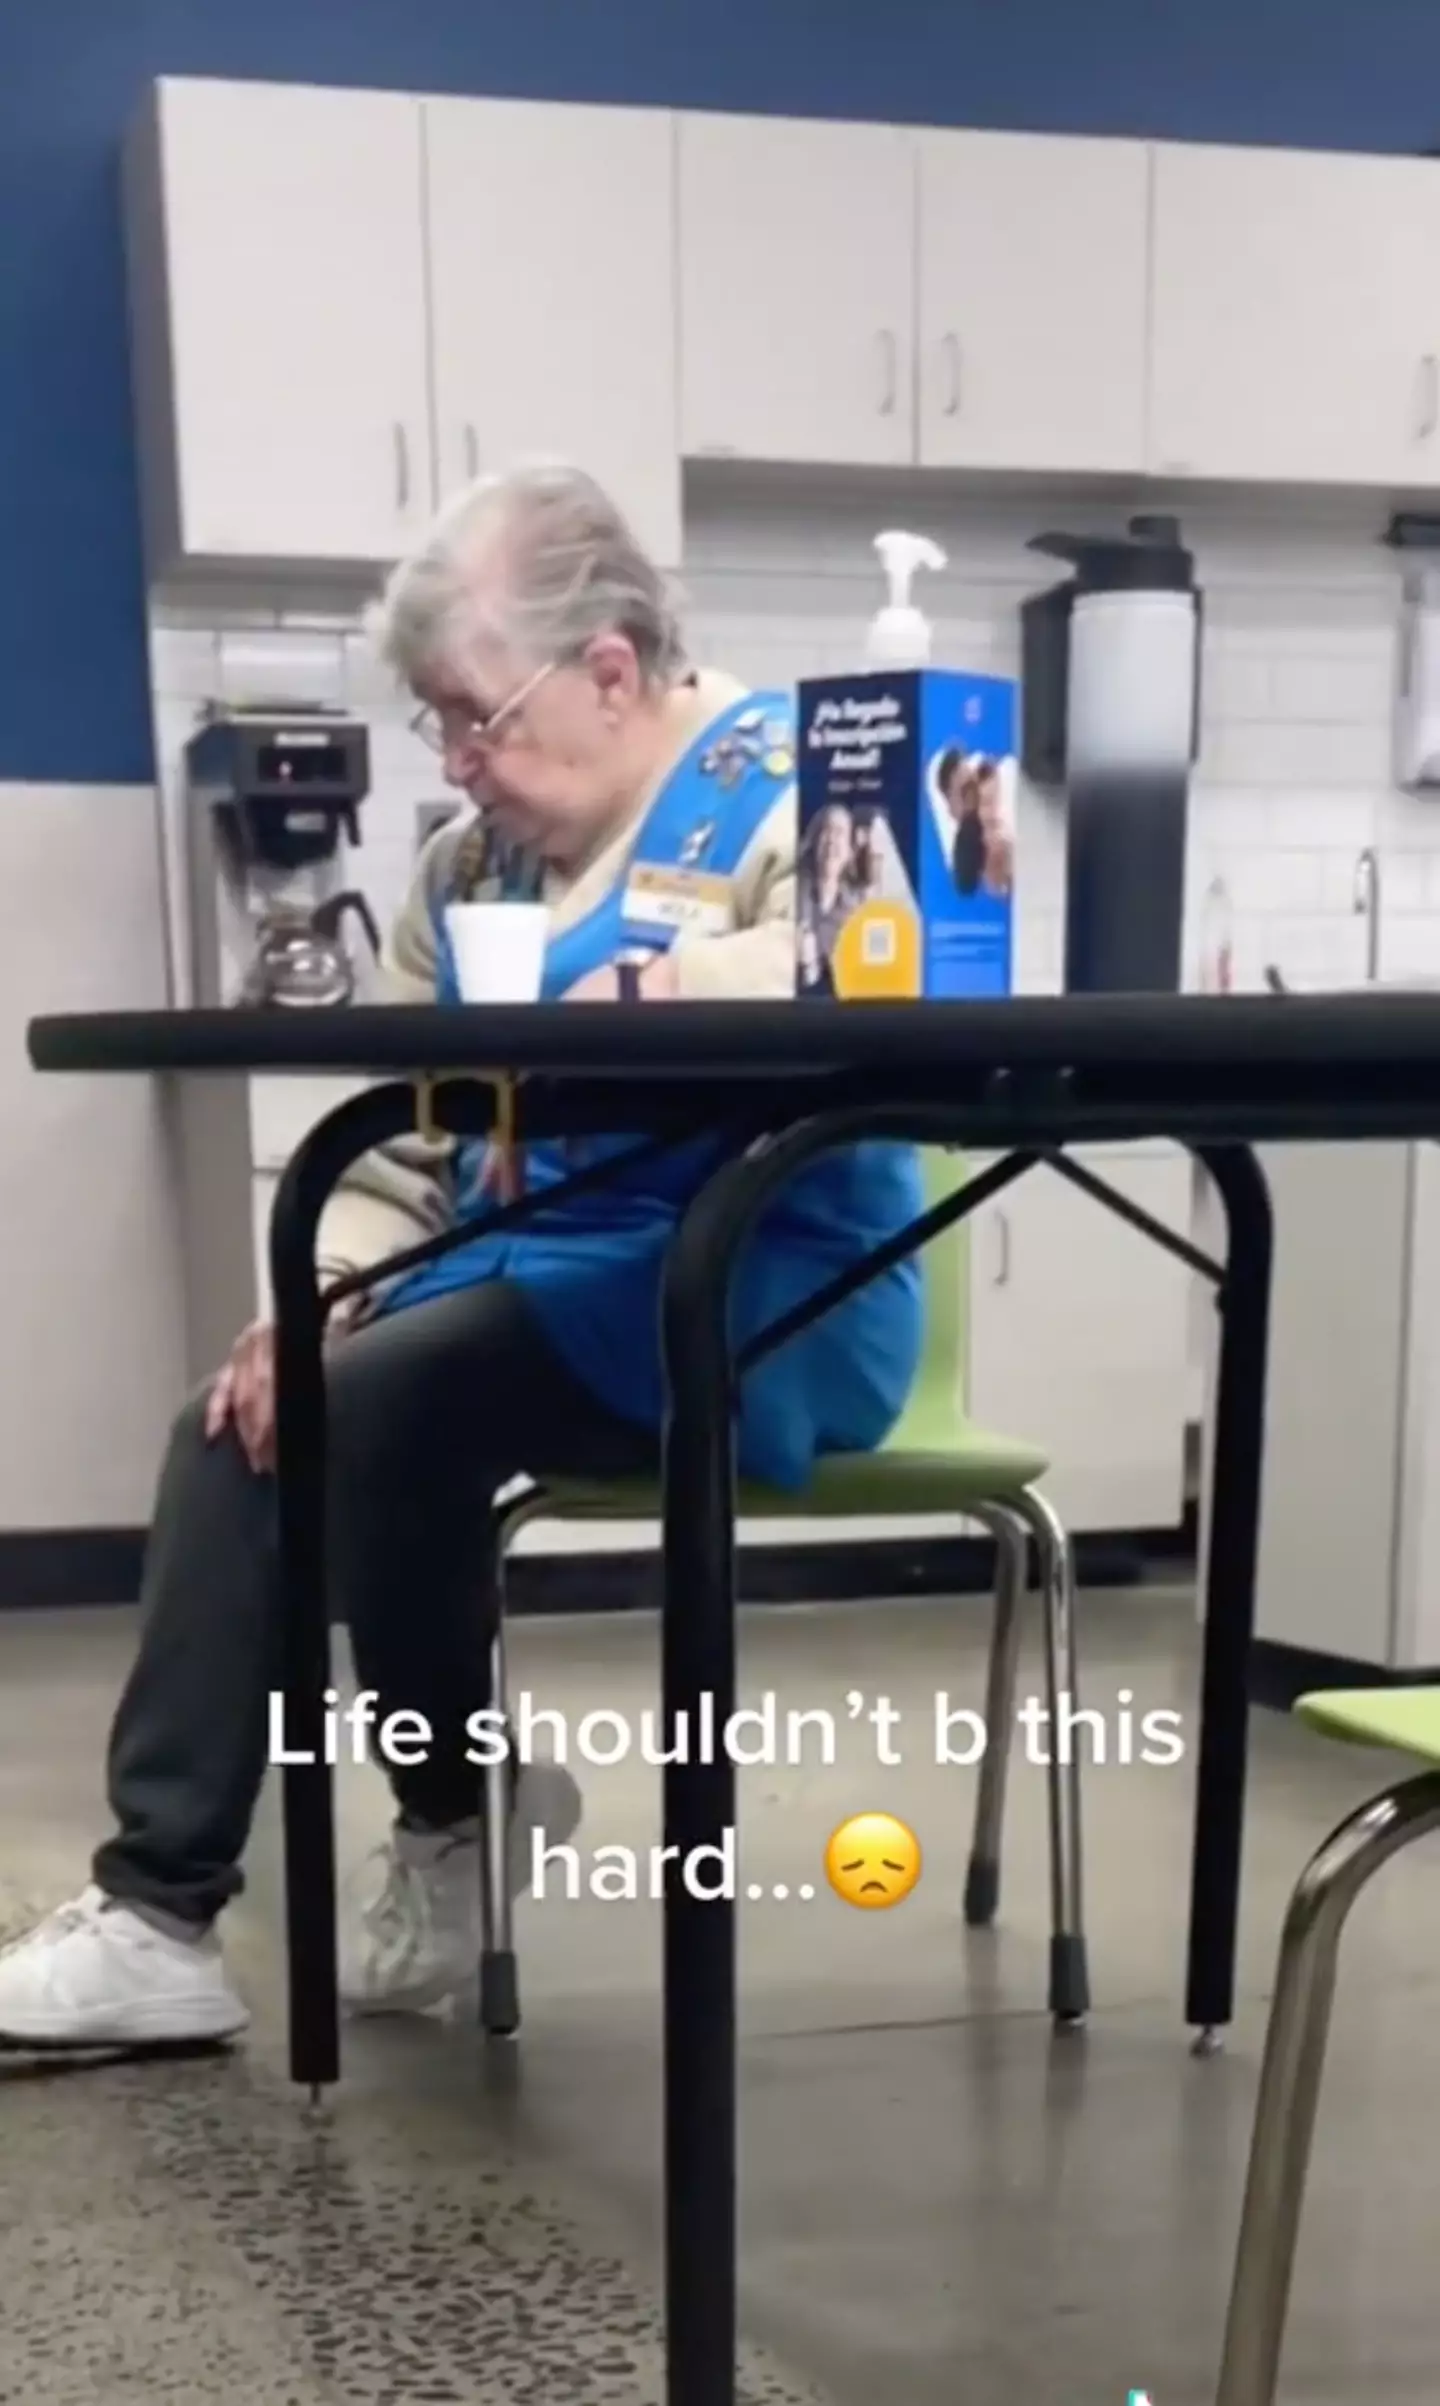 The TikToker 'felt bad' for the woman working at Walmart in her golden years.